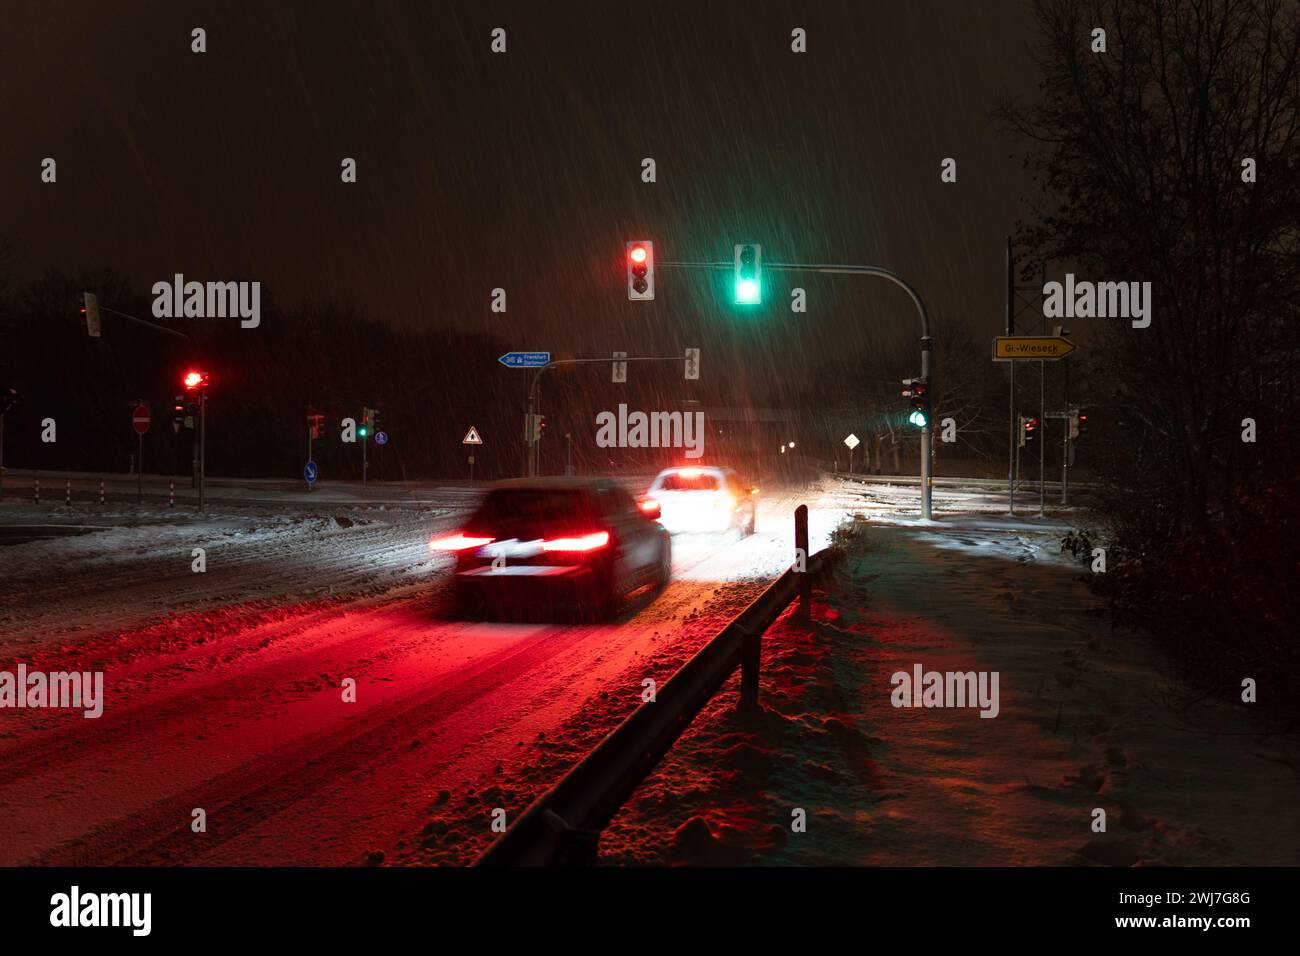 Two cars driving over the intersection in a snowstorm at night in giessen, germany Stock Photo